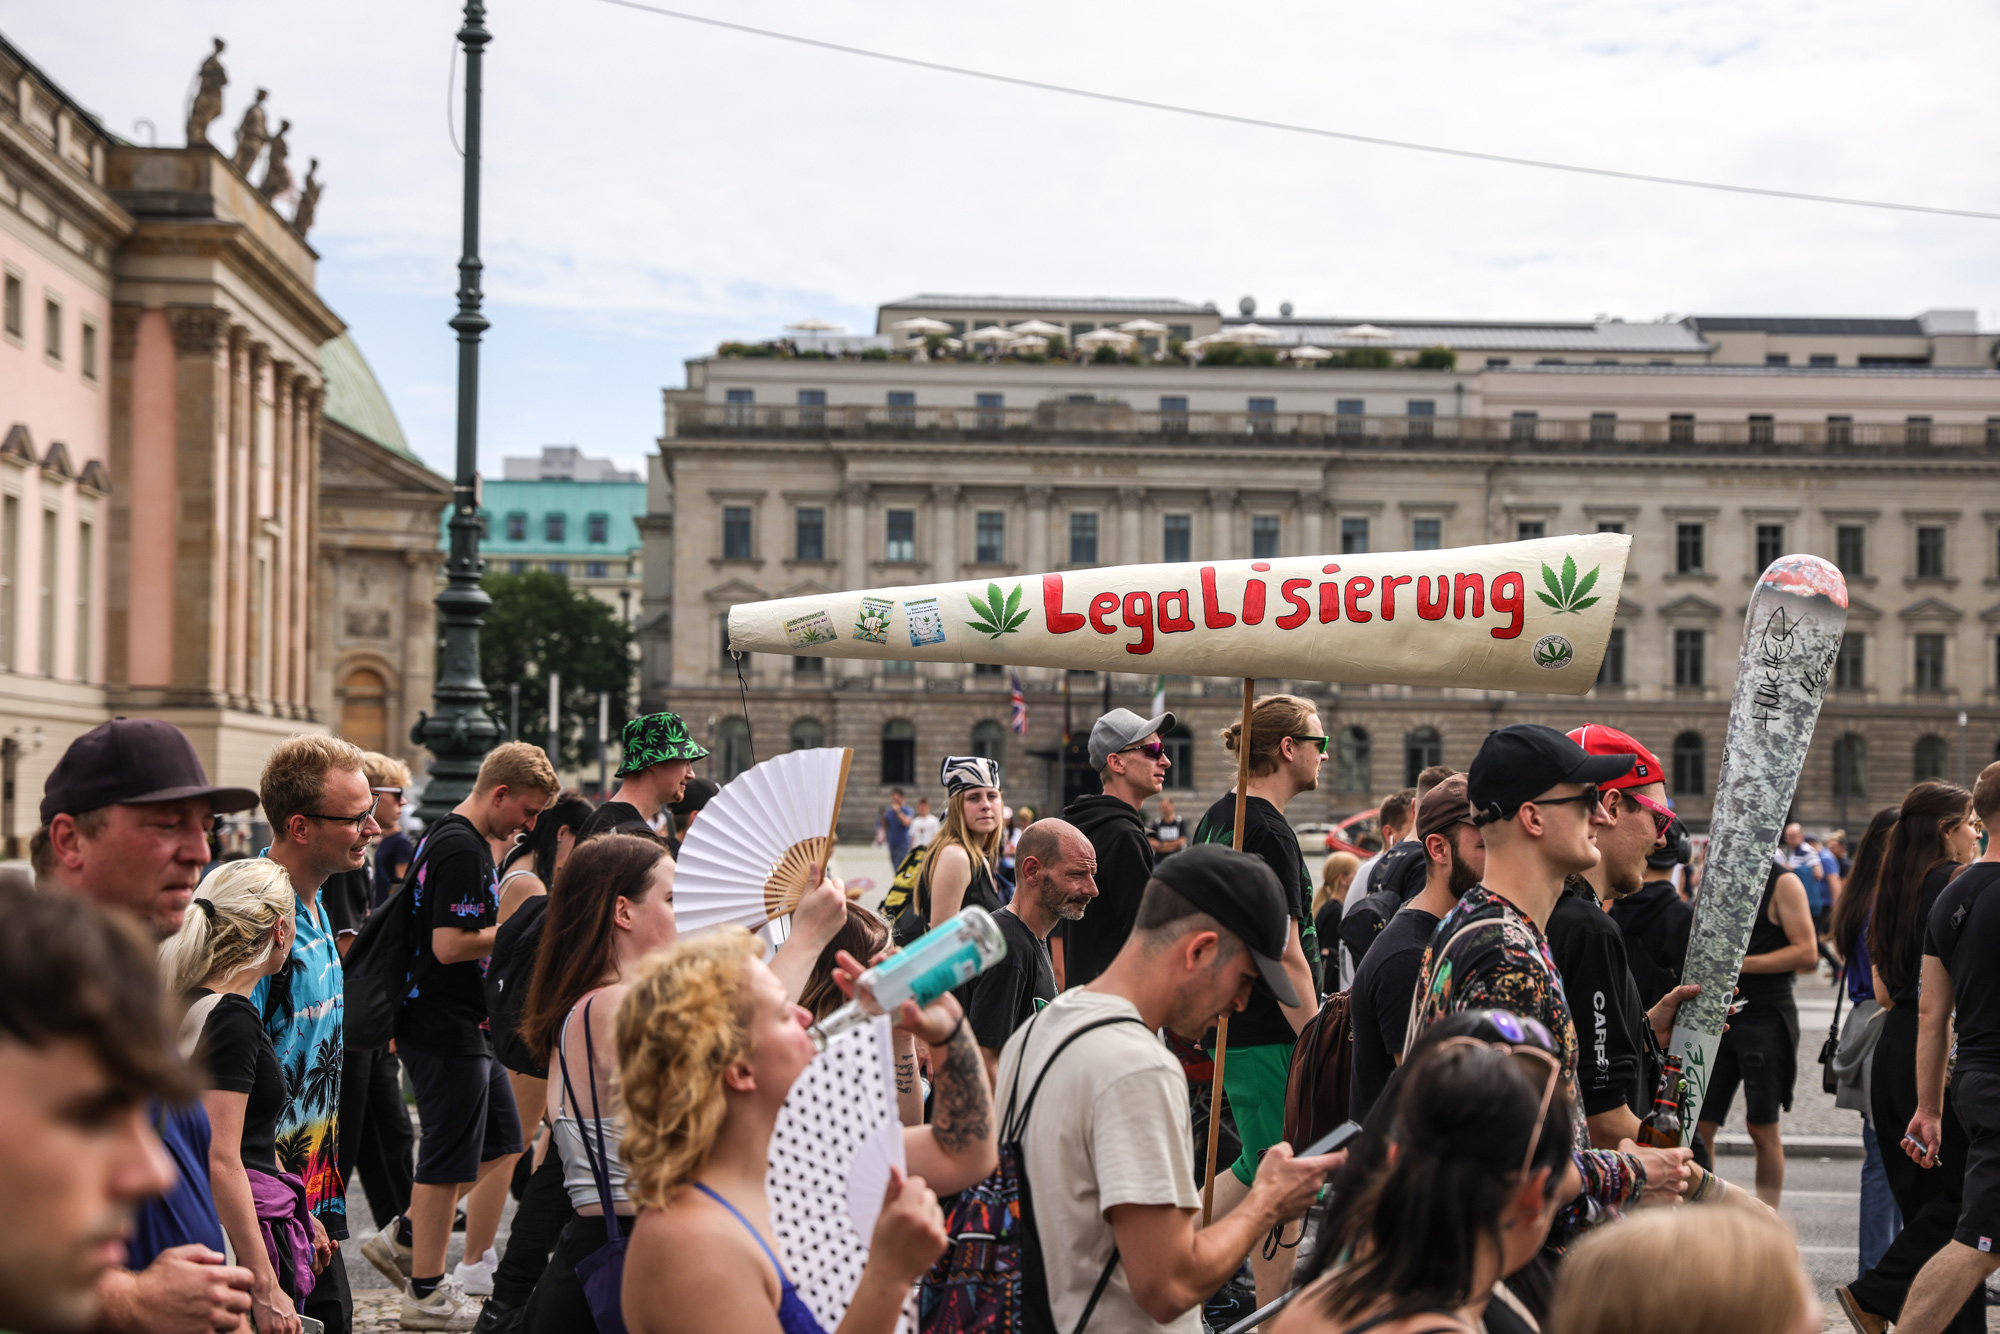 Germany Cannabis Bill Passes Scholz Cabinet in Legalization Push